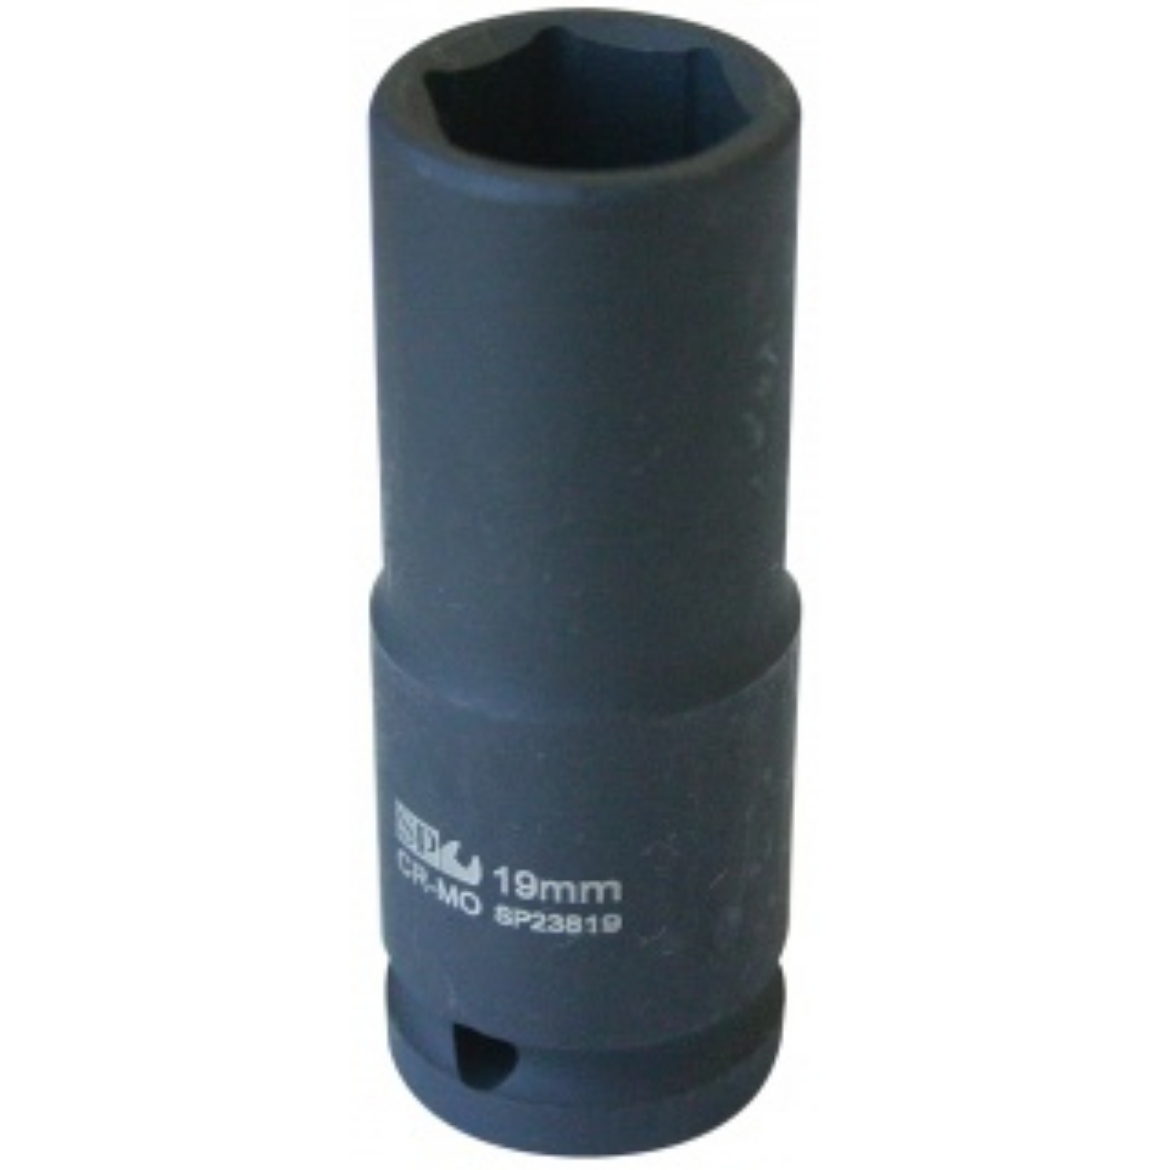 Picture of SOCKET IMPACT 1/2" DR 6PT DEEP METRIC 16MM SP TOOLS